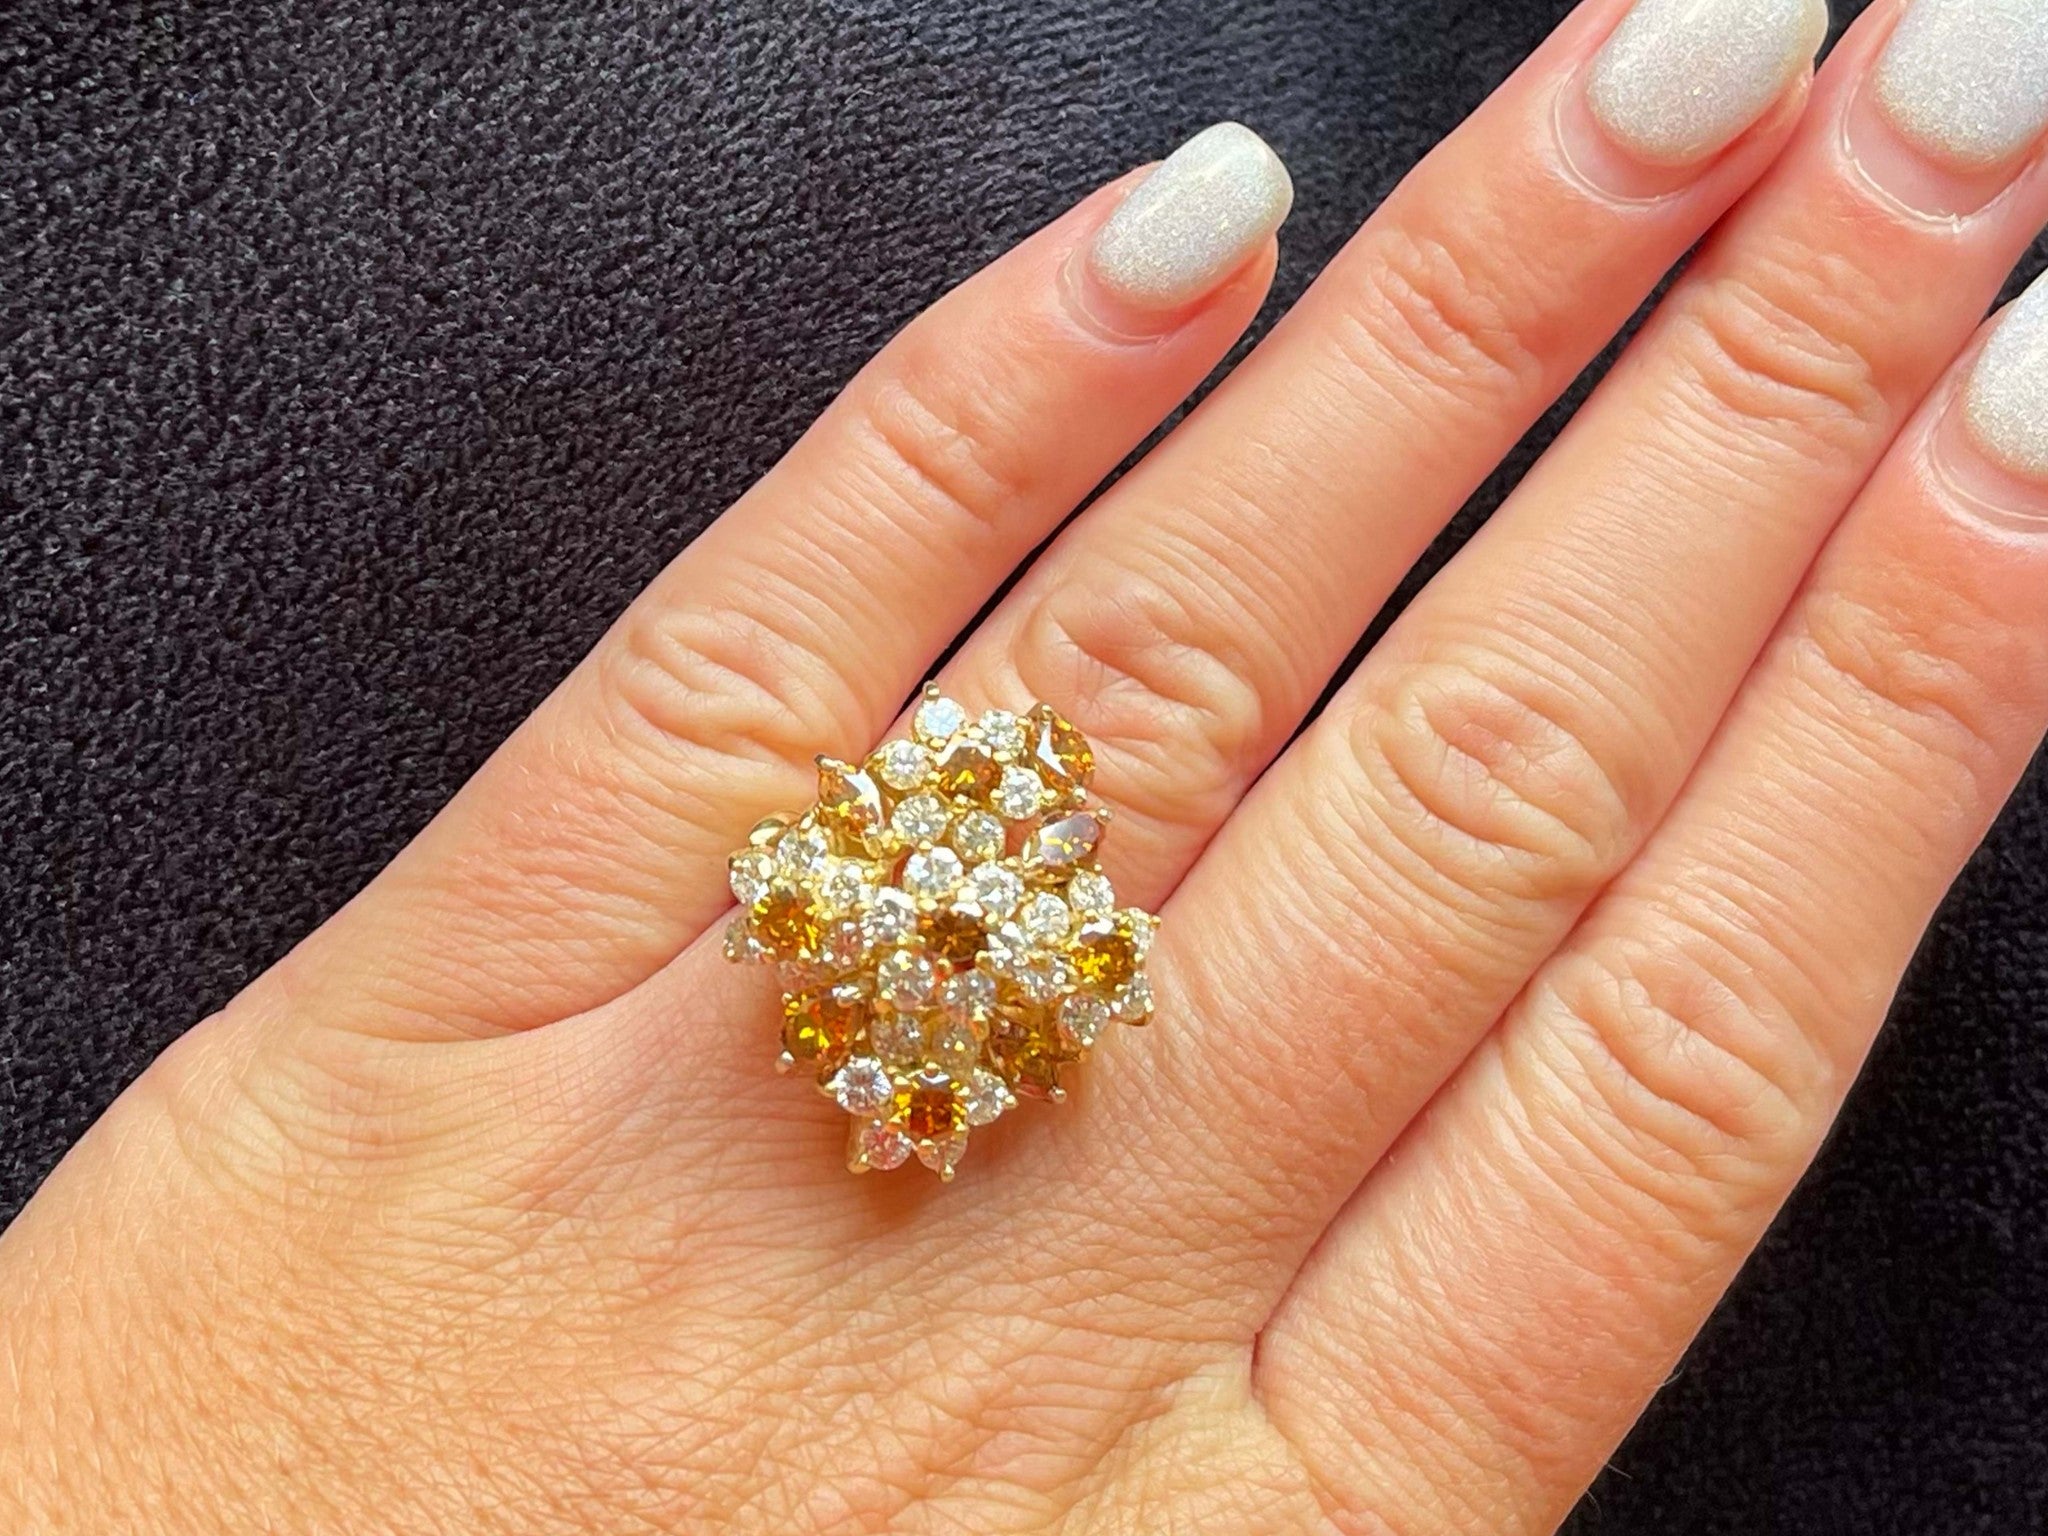 Terrel and Zimmelman Natural Fancy Vivid Diamond Cluster Ring in 18K Yellow Gold